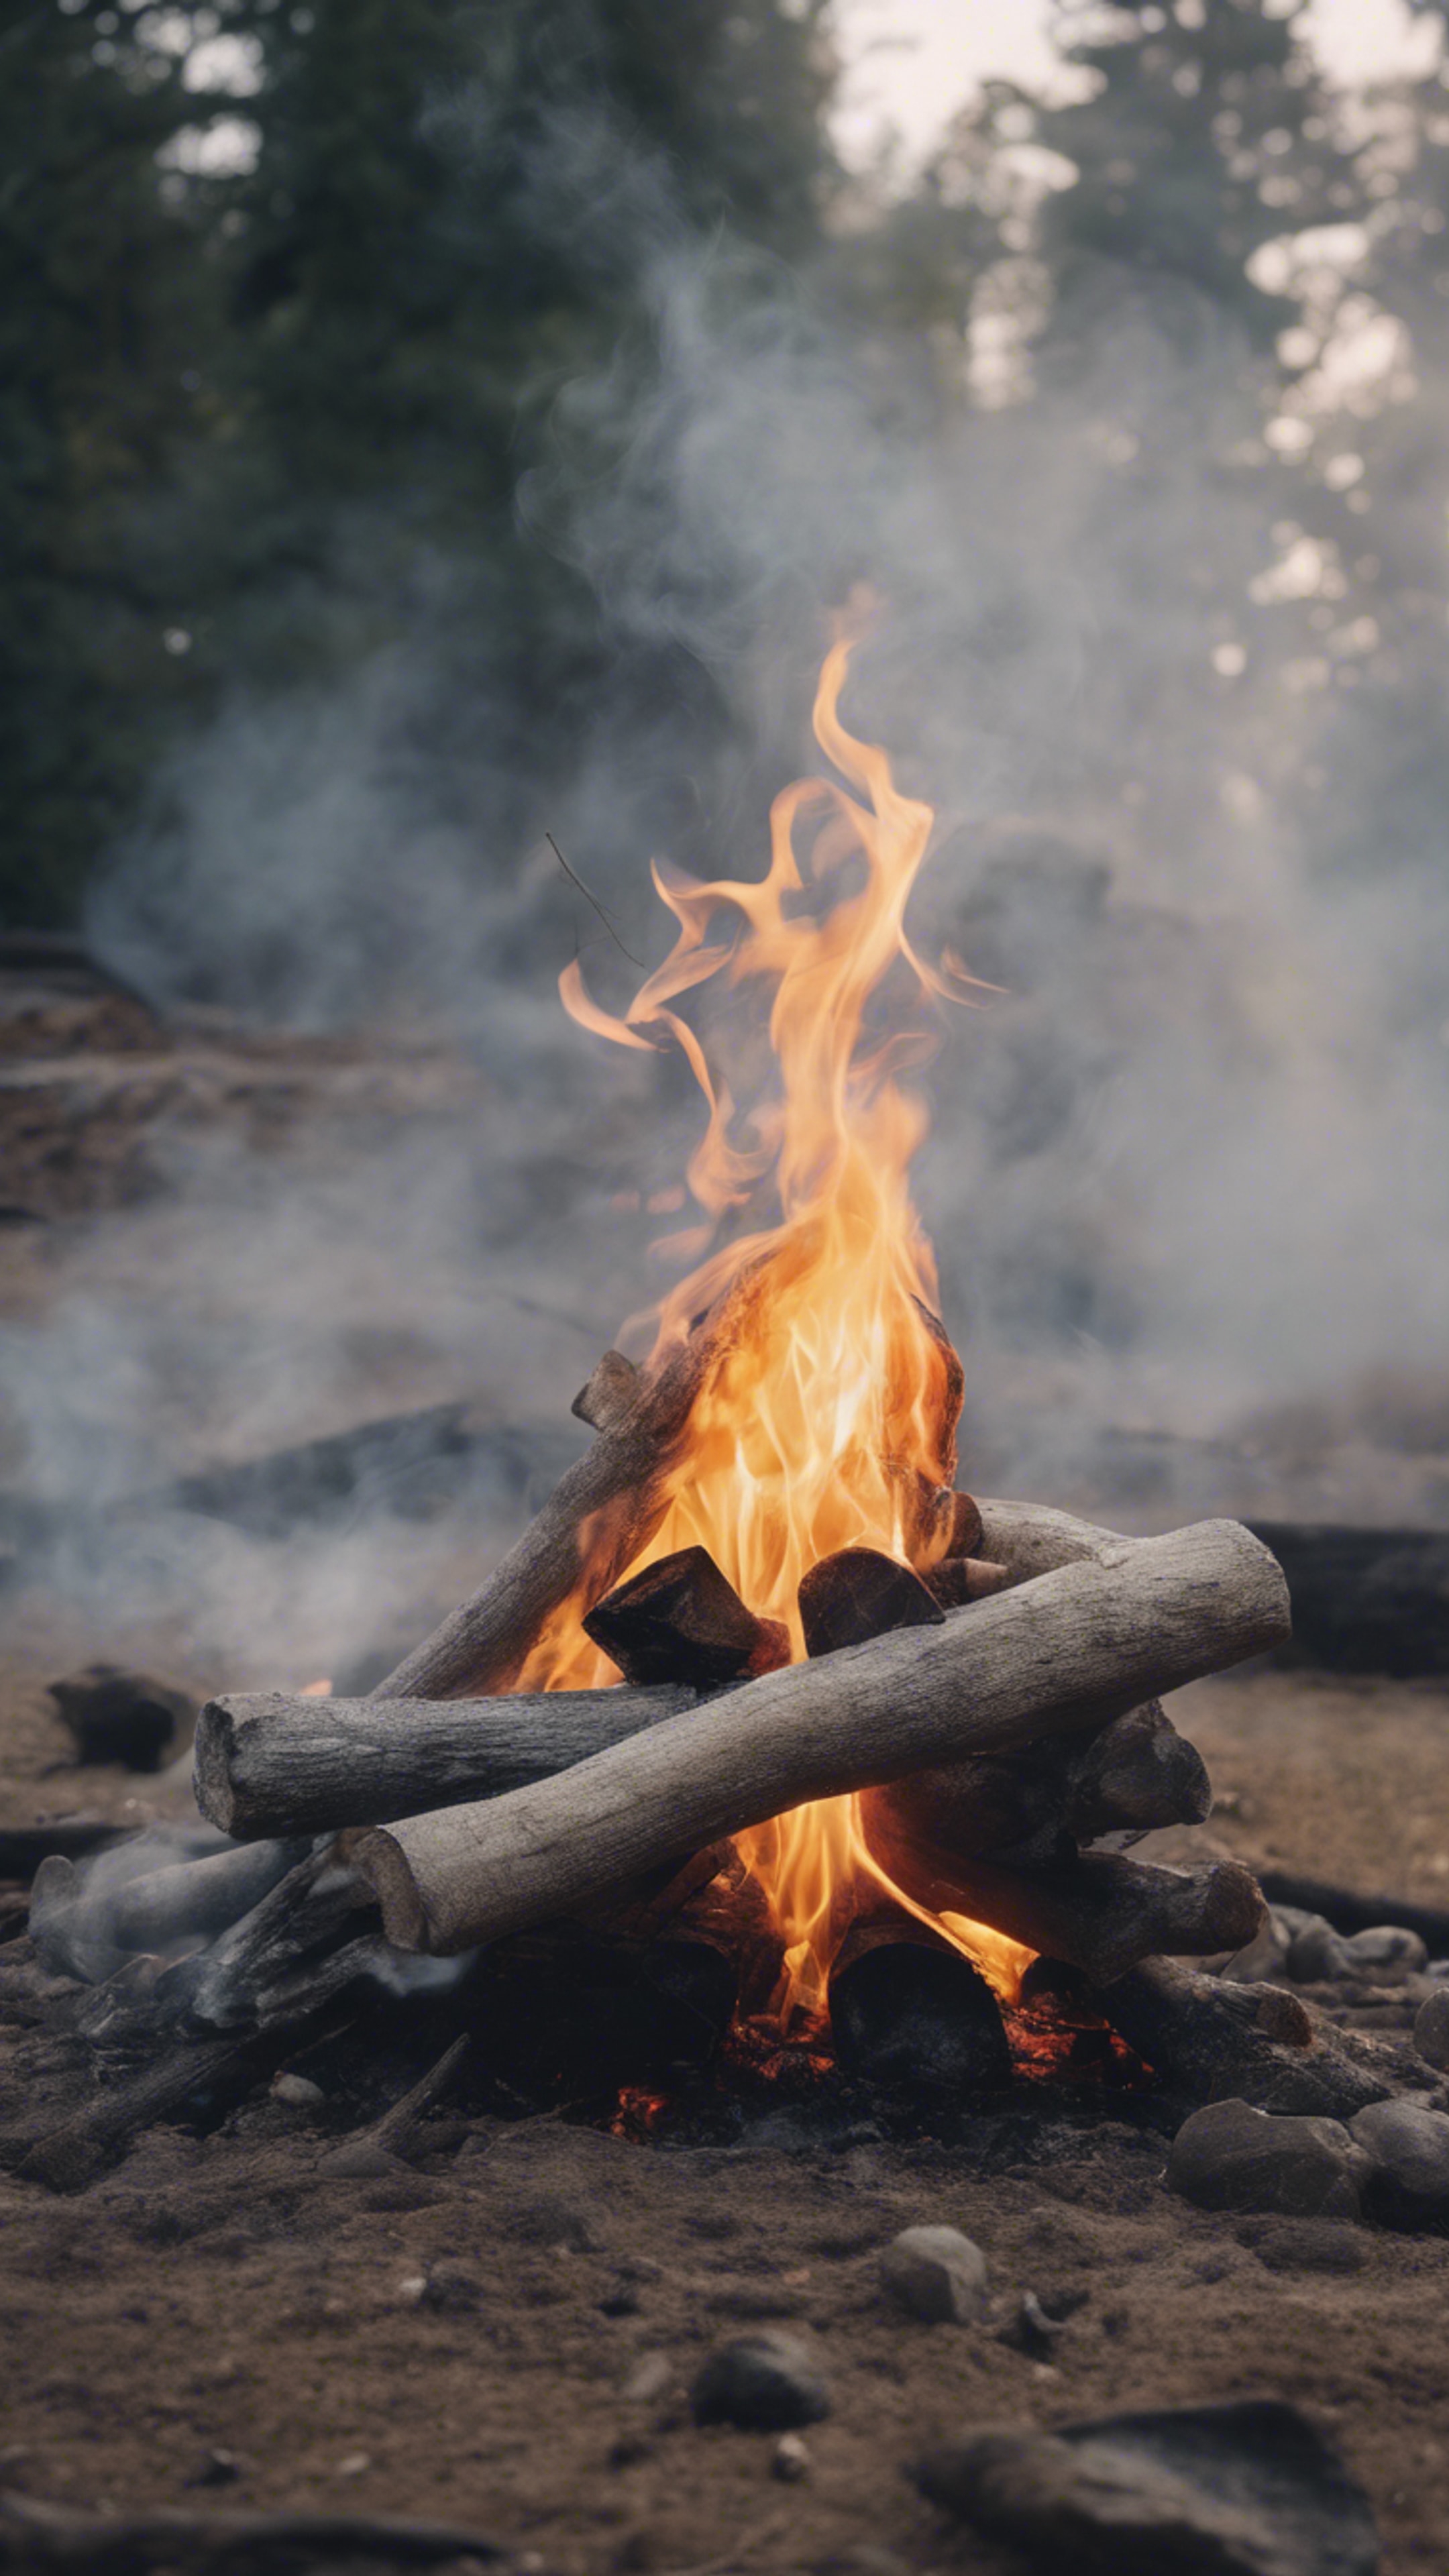 Grey smoke gently rising from an extinguished campfire at dawn.壁紙[4606284c8b7f47d8923e]